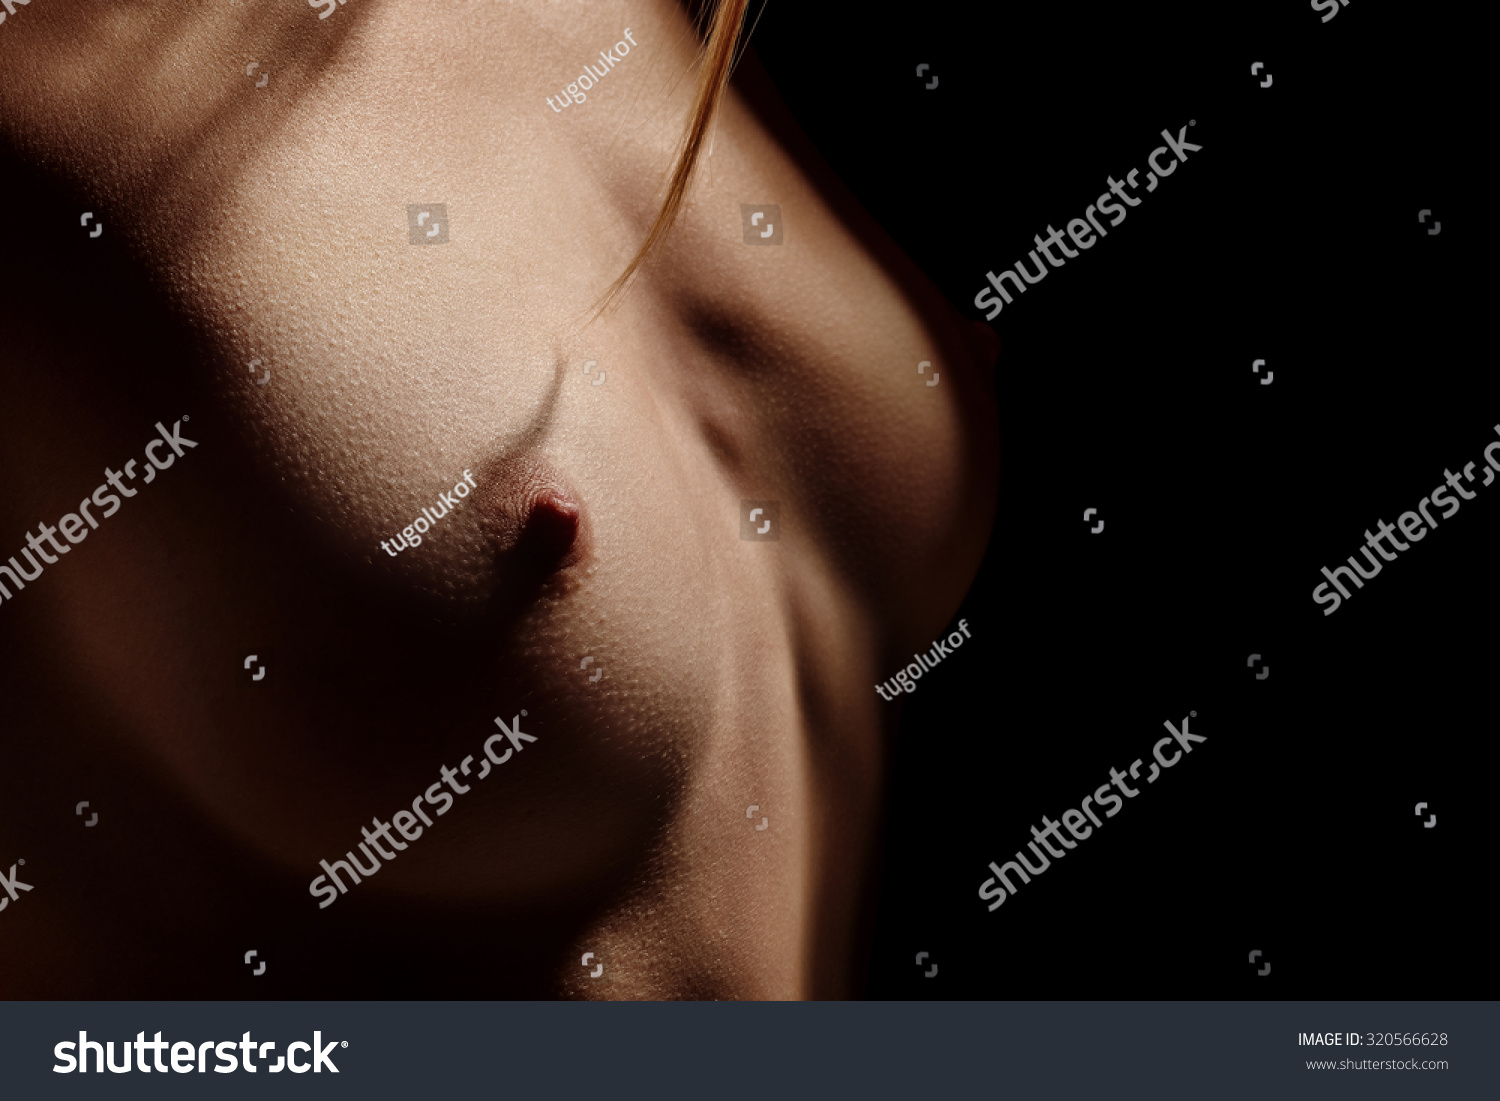 Small Breasted Women Naked